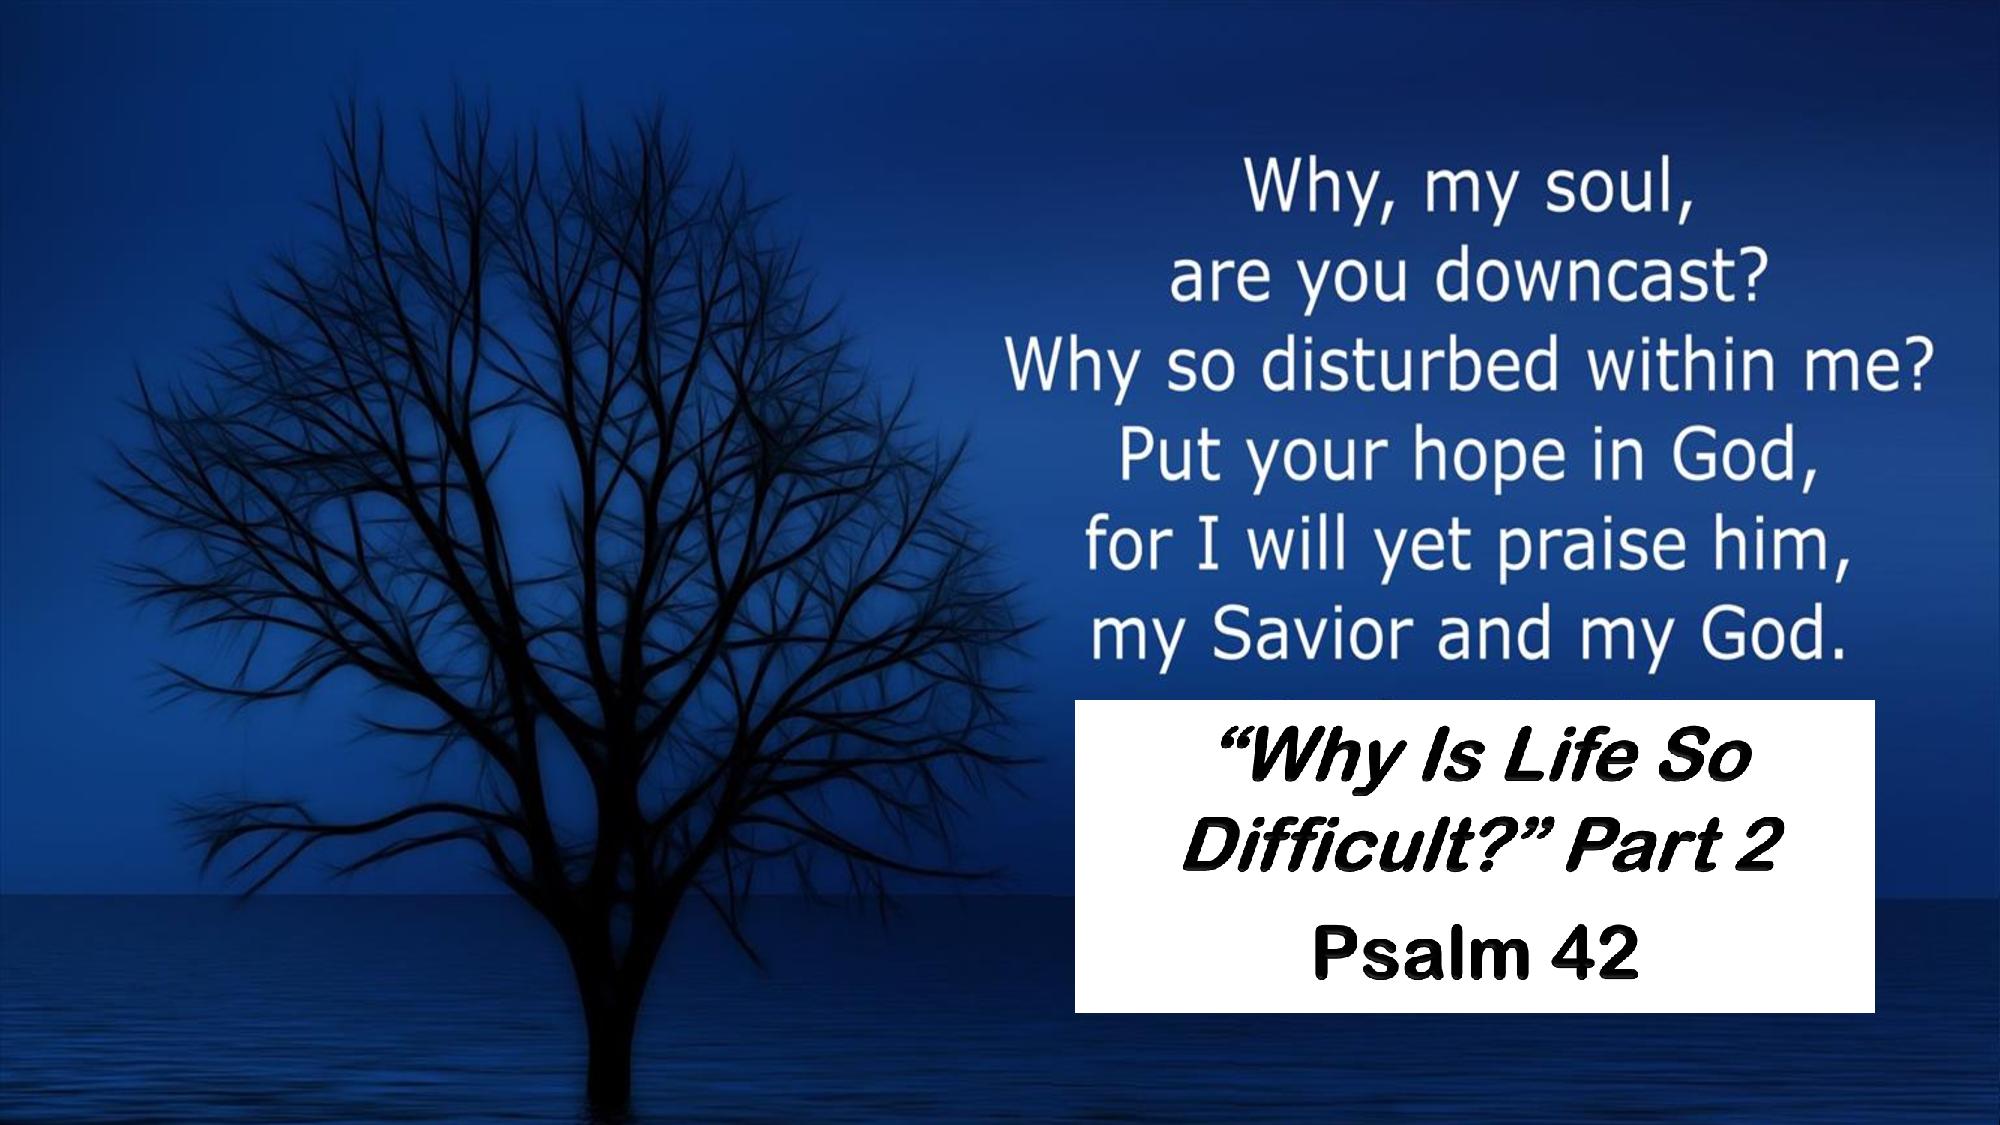 Why is Life So Difficult – Part 2